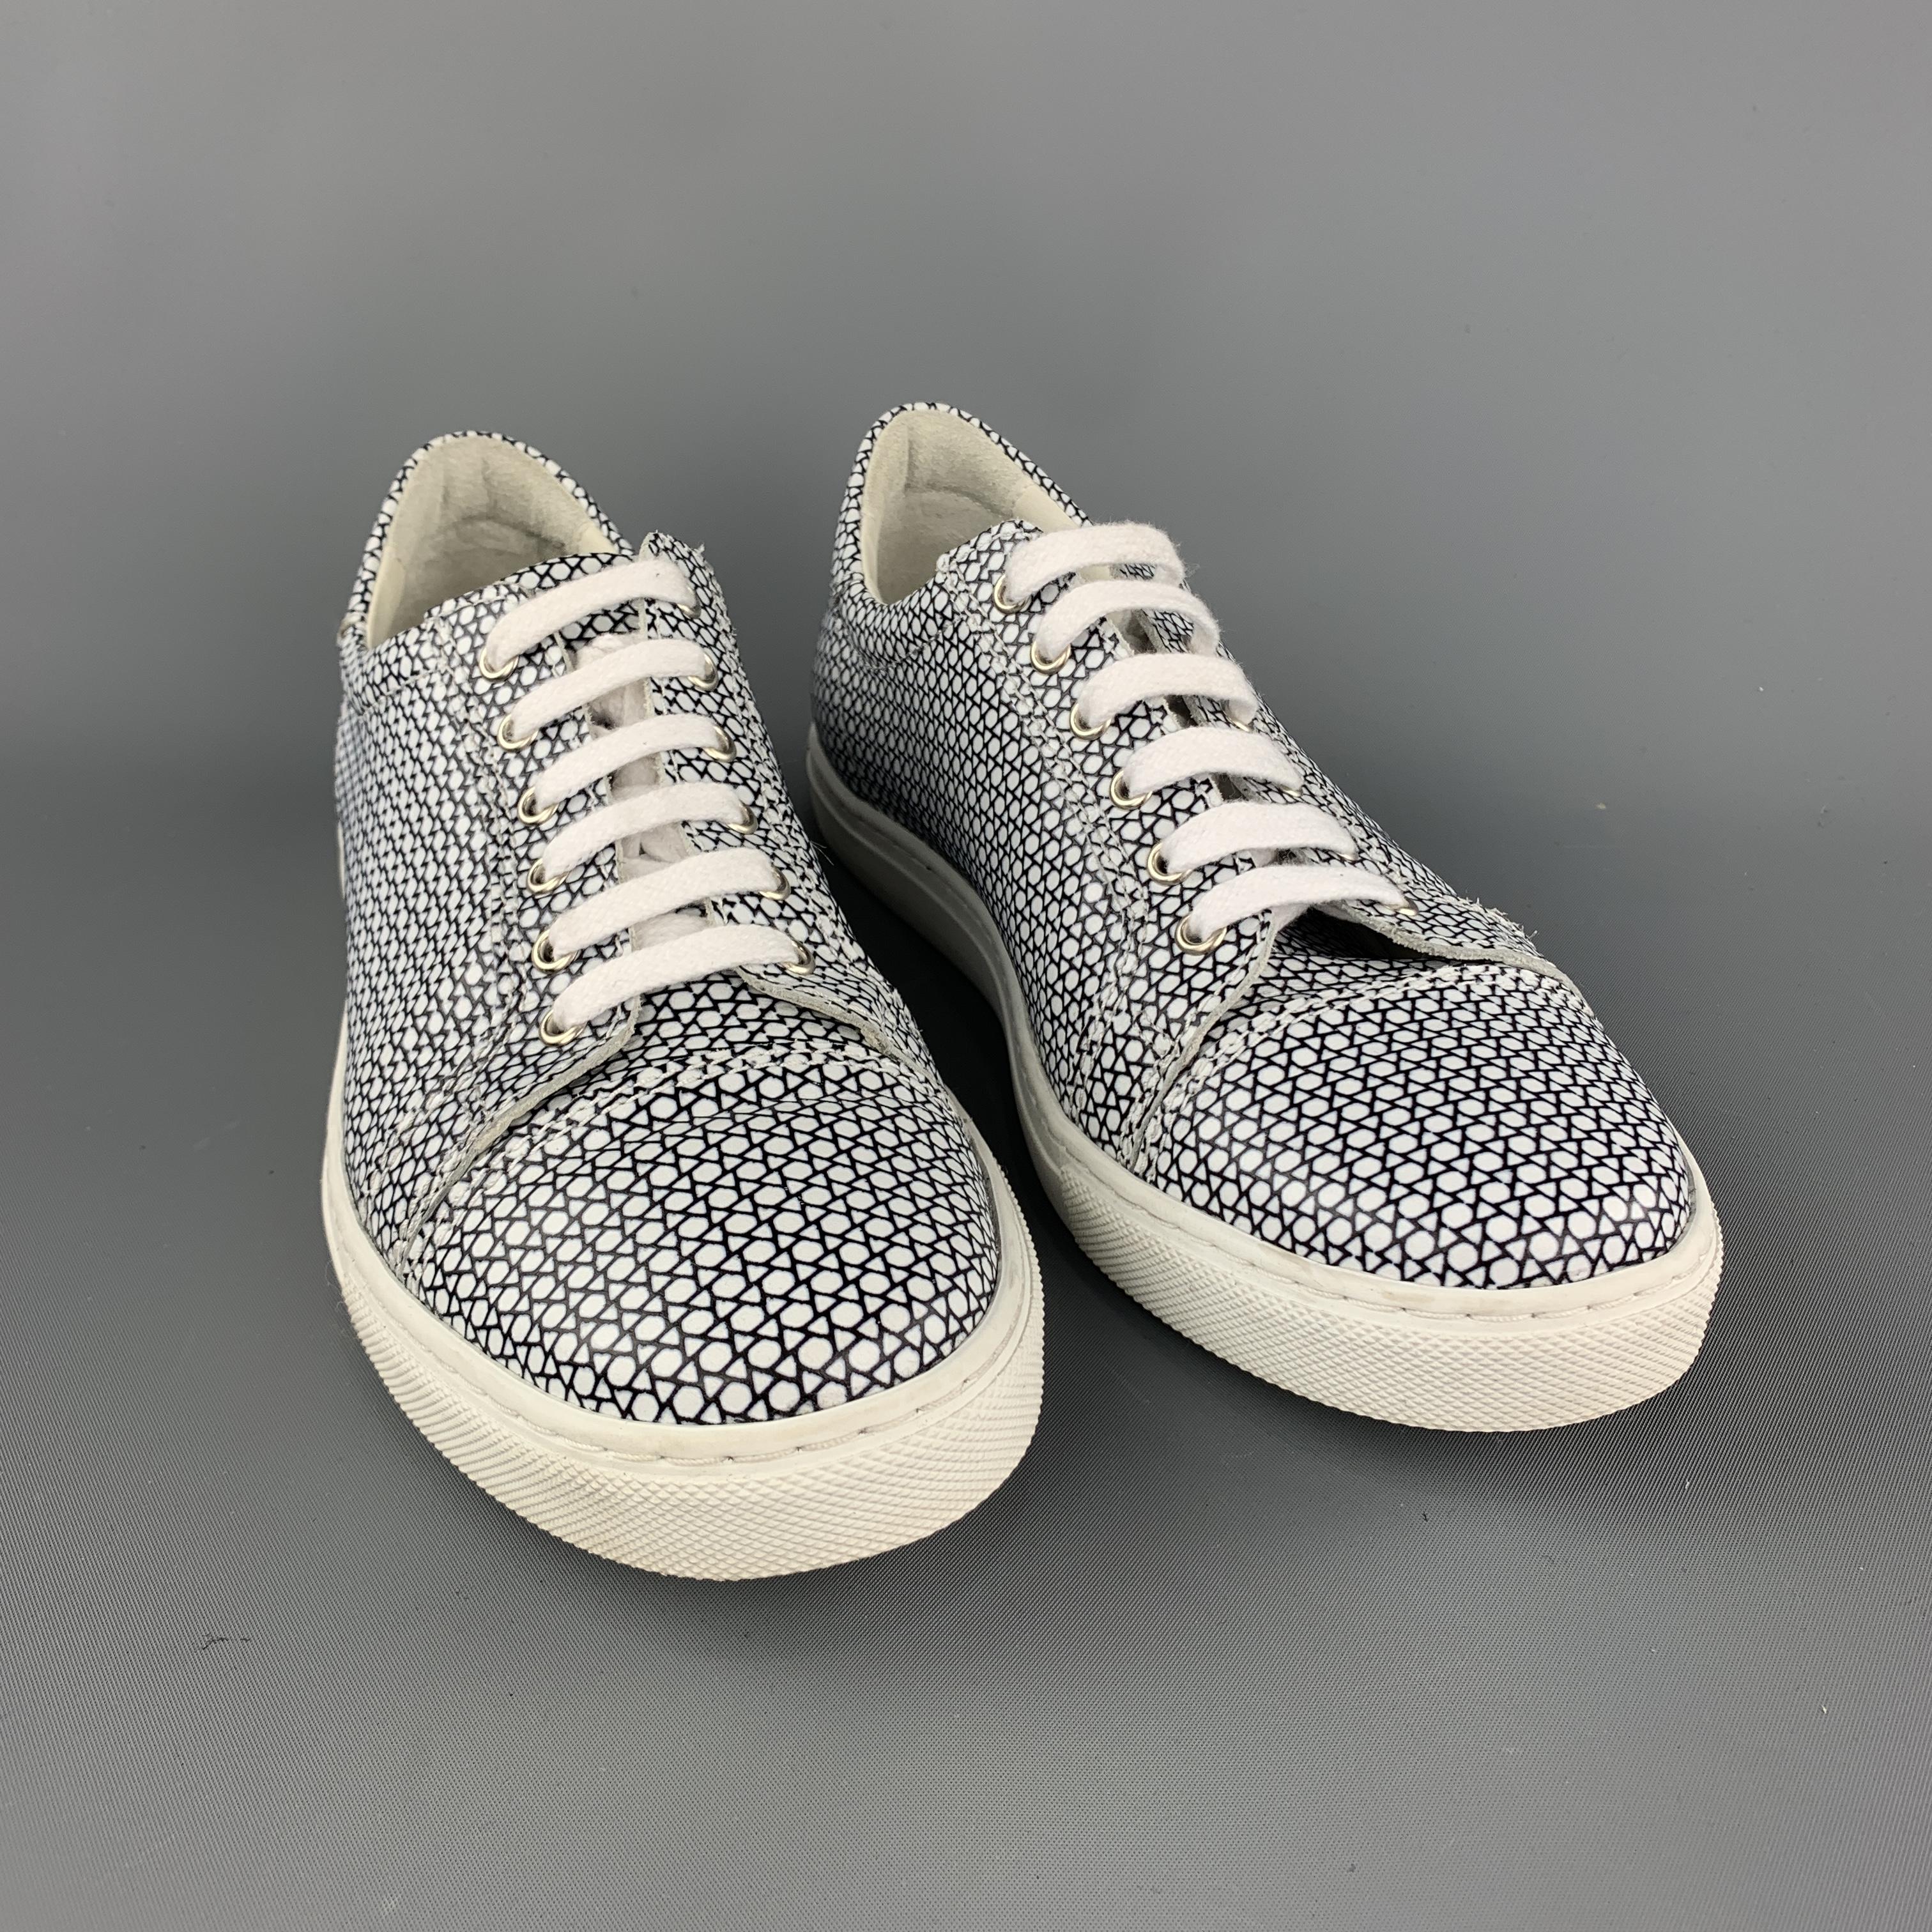 COMME des GARCONS SHIRT sneaker comes in a white and black print leather featuring a lace up style and a rubber sole.
 
Excellent Pre-Owned Condition.
Marked: 7.5
 
Measurements:
 
Outsole: 11.5 in x 4.25 in.